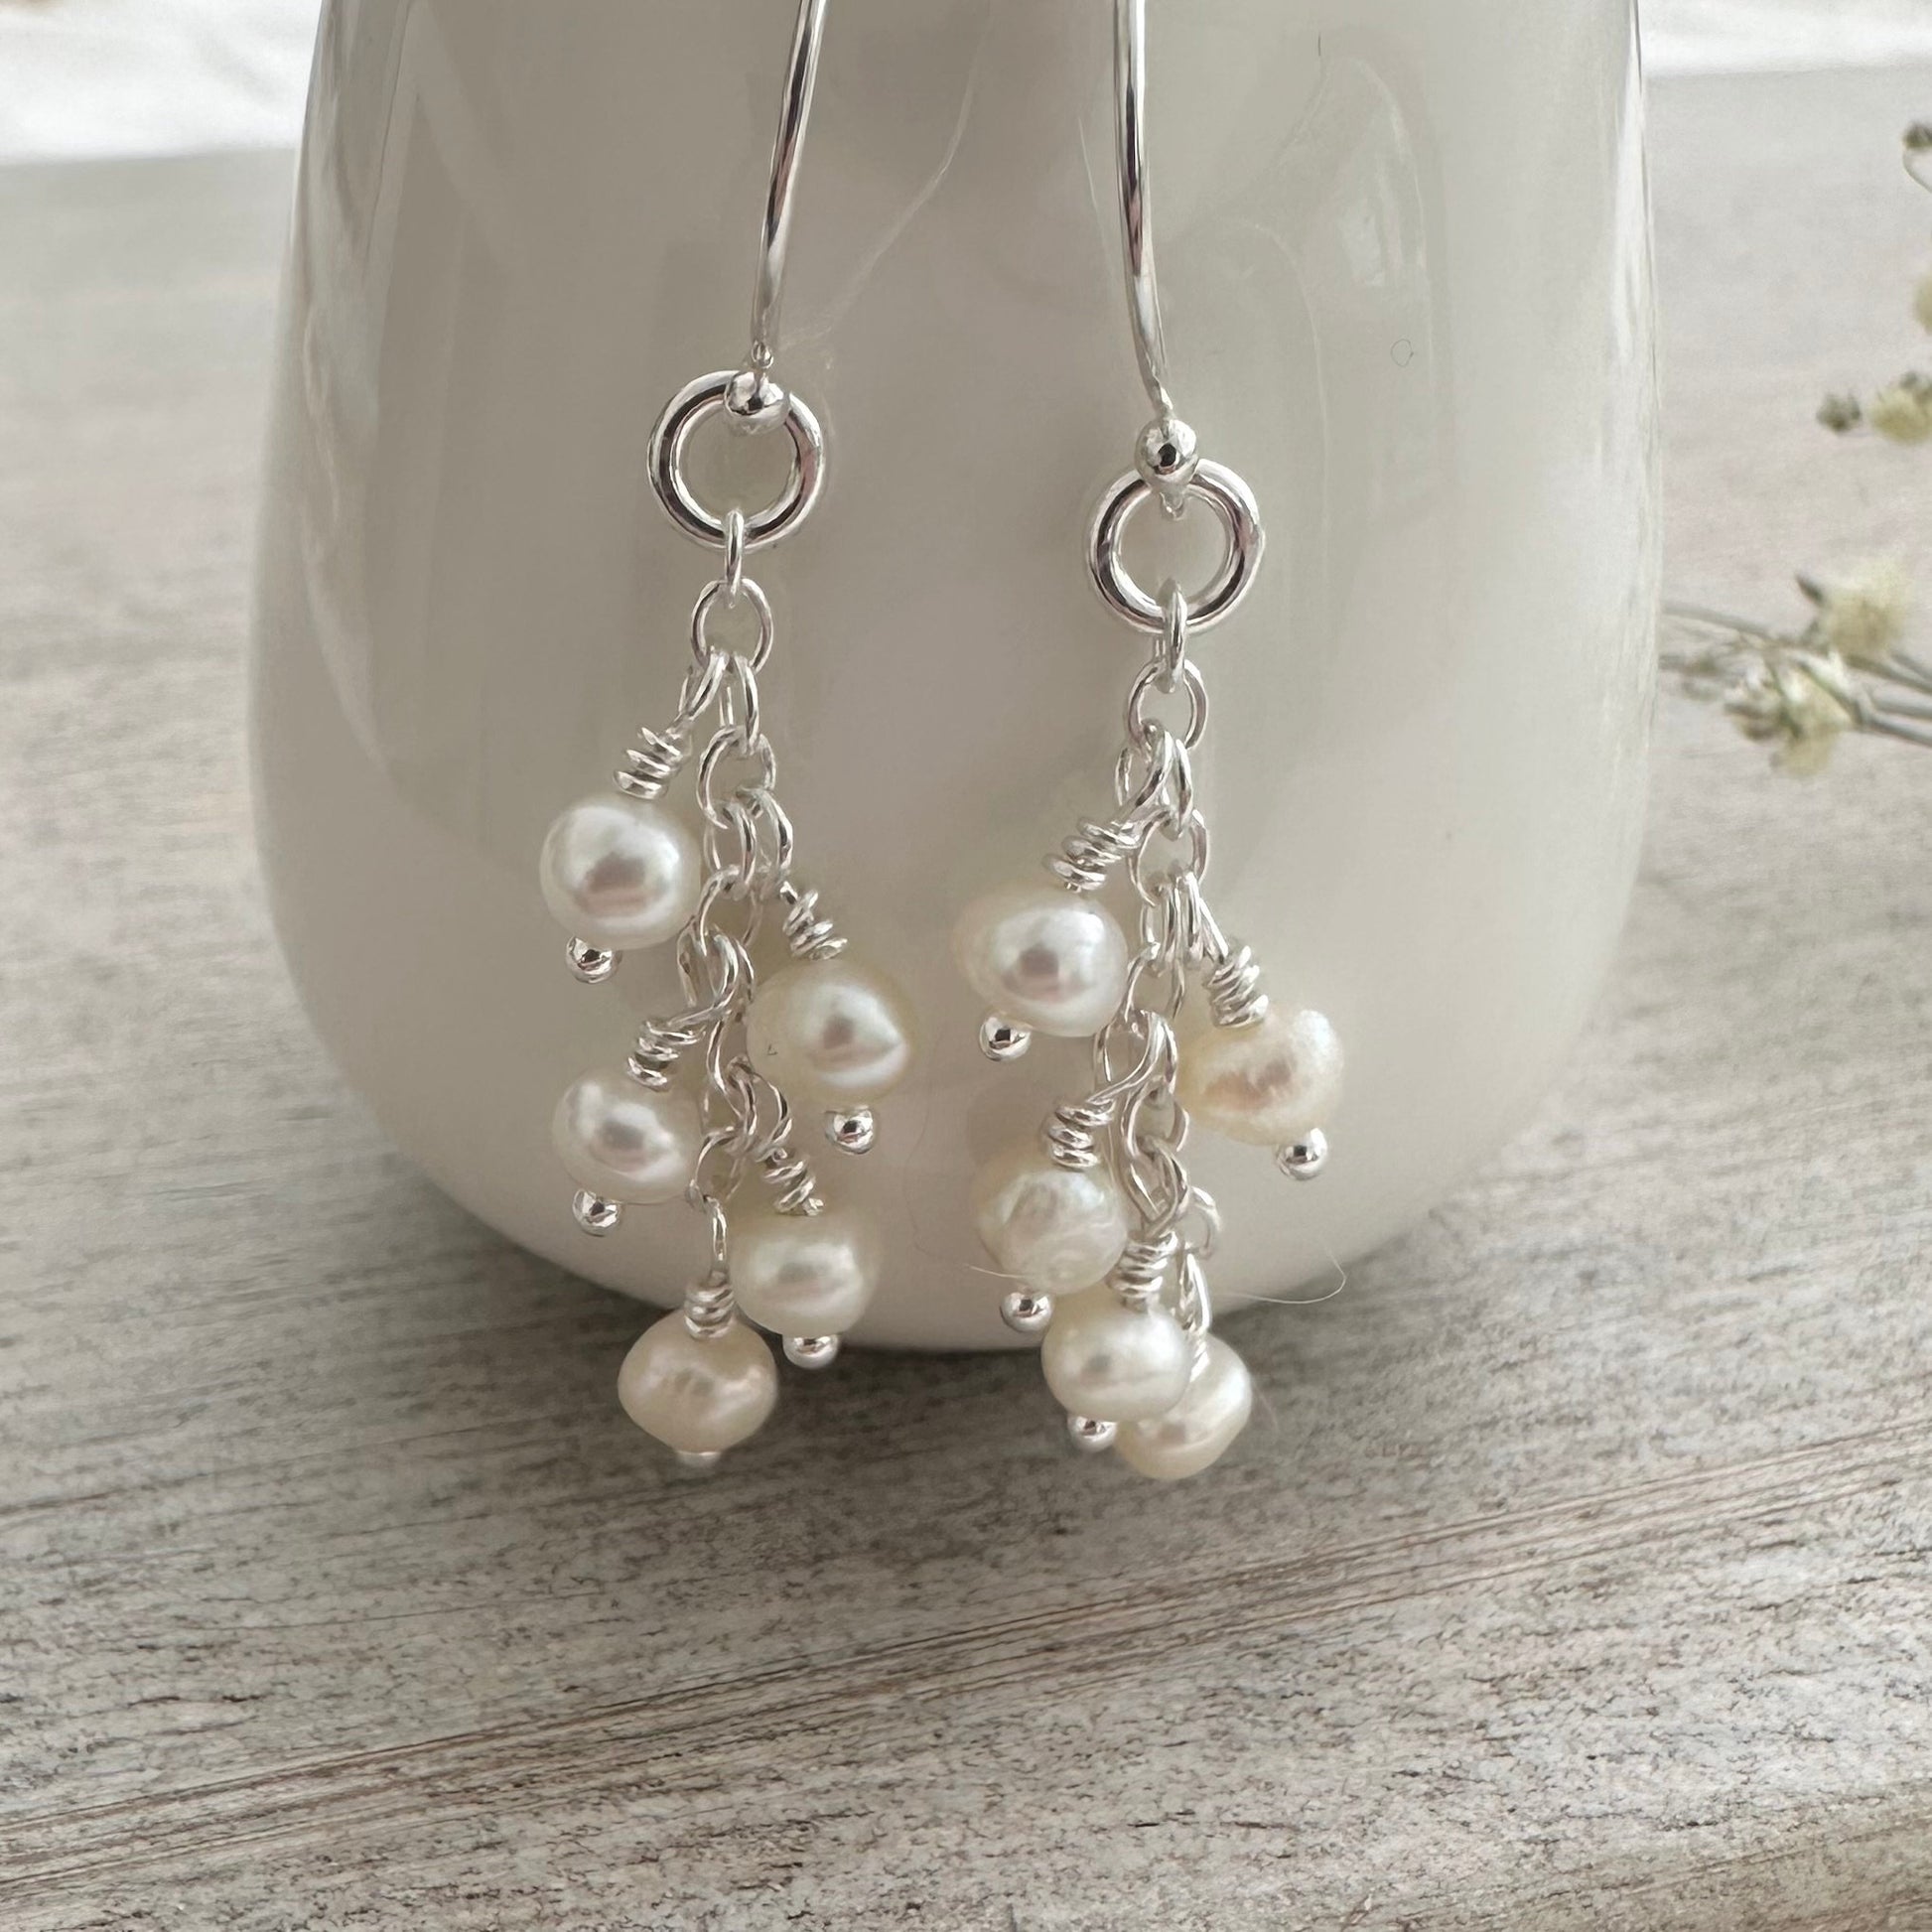 Dainty Ivory Pearl Drop Earrings for birthday, June Birthstone and Sterling Silver Made to order jewellery gift for women